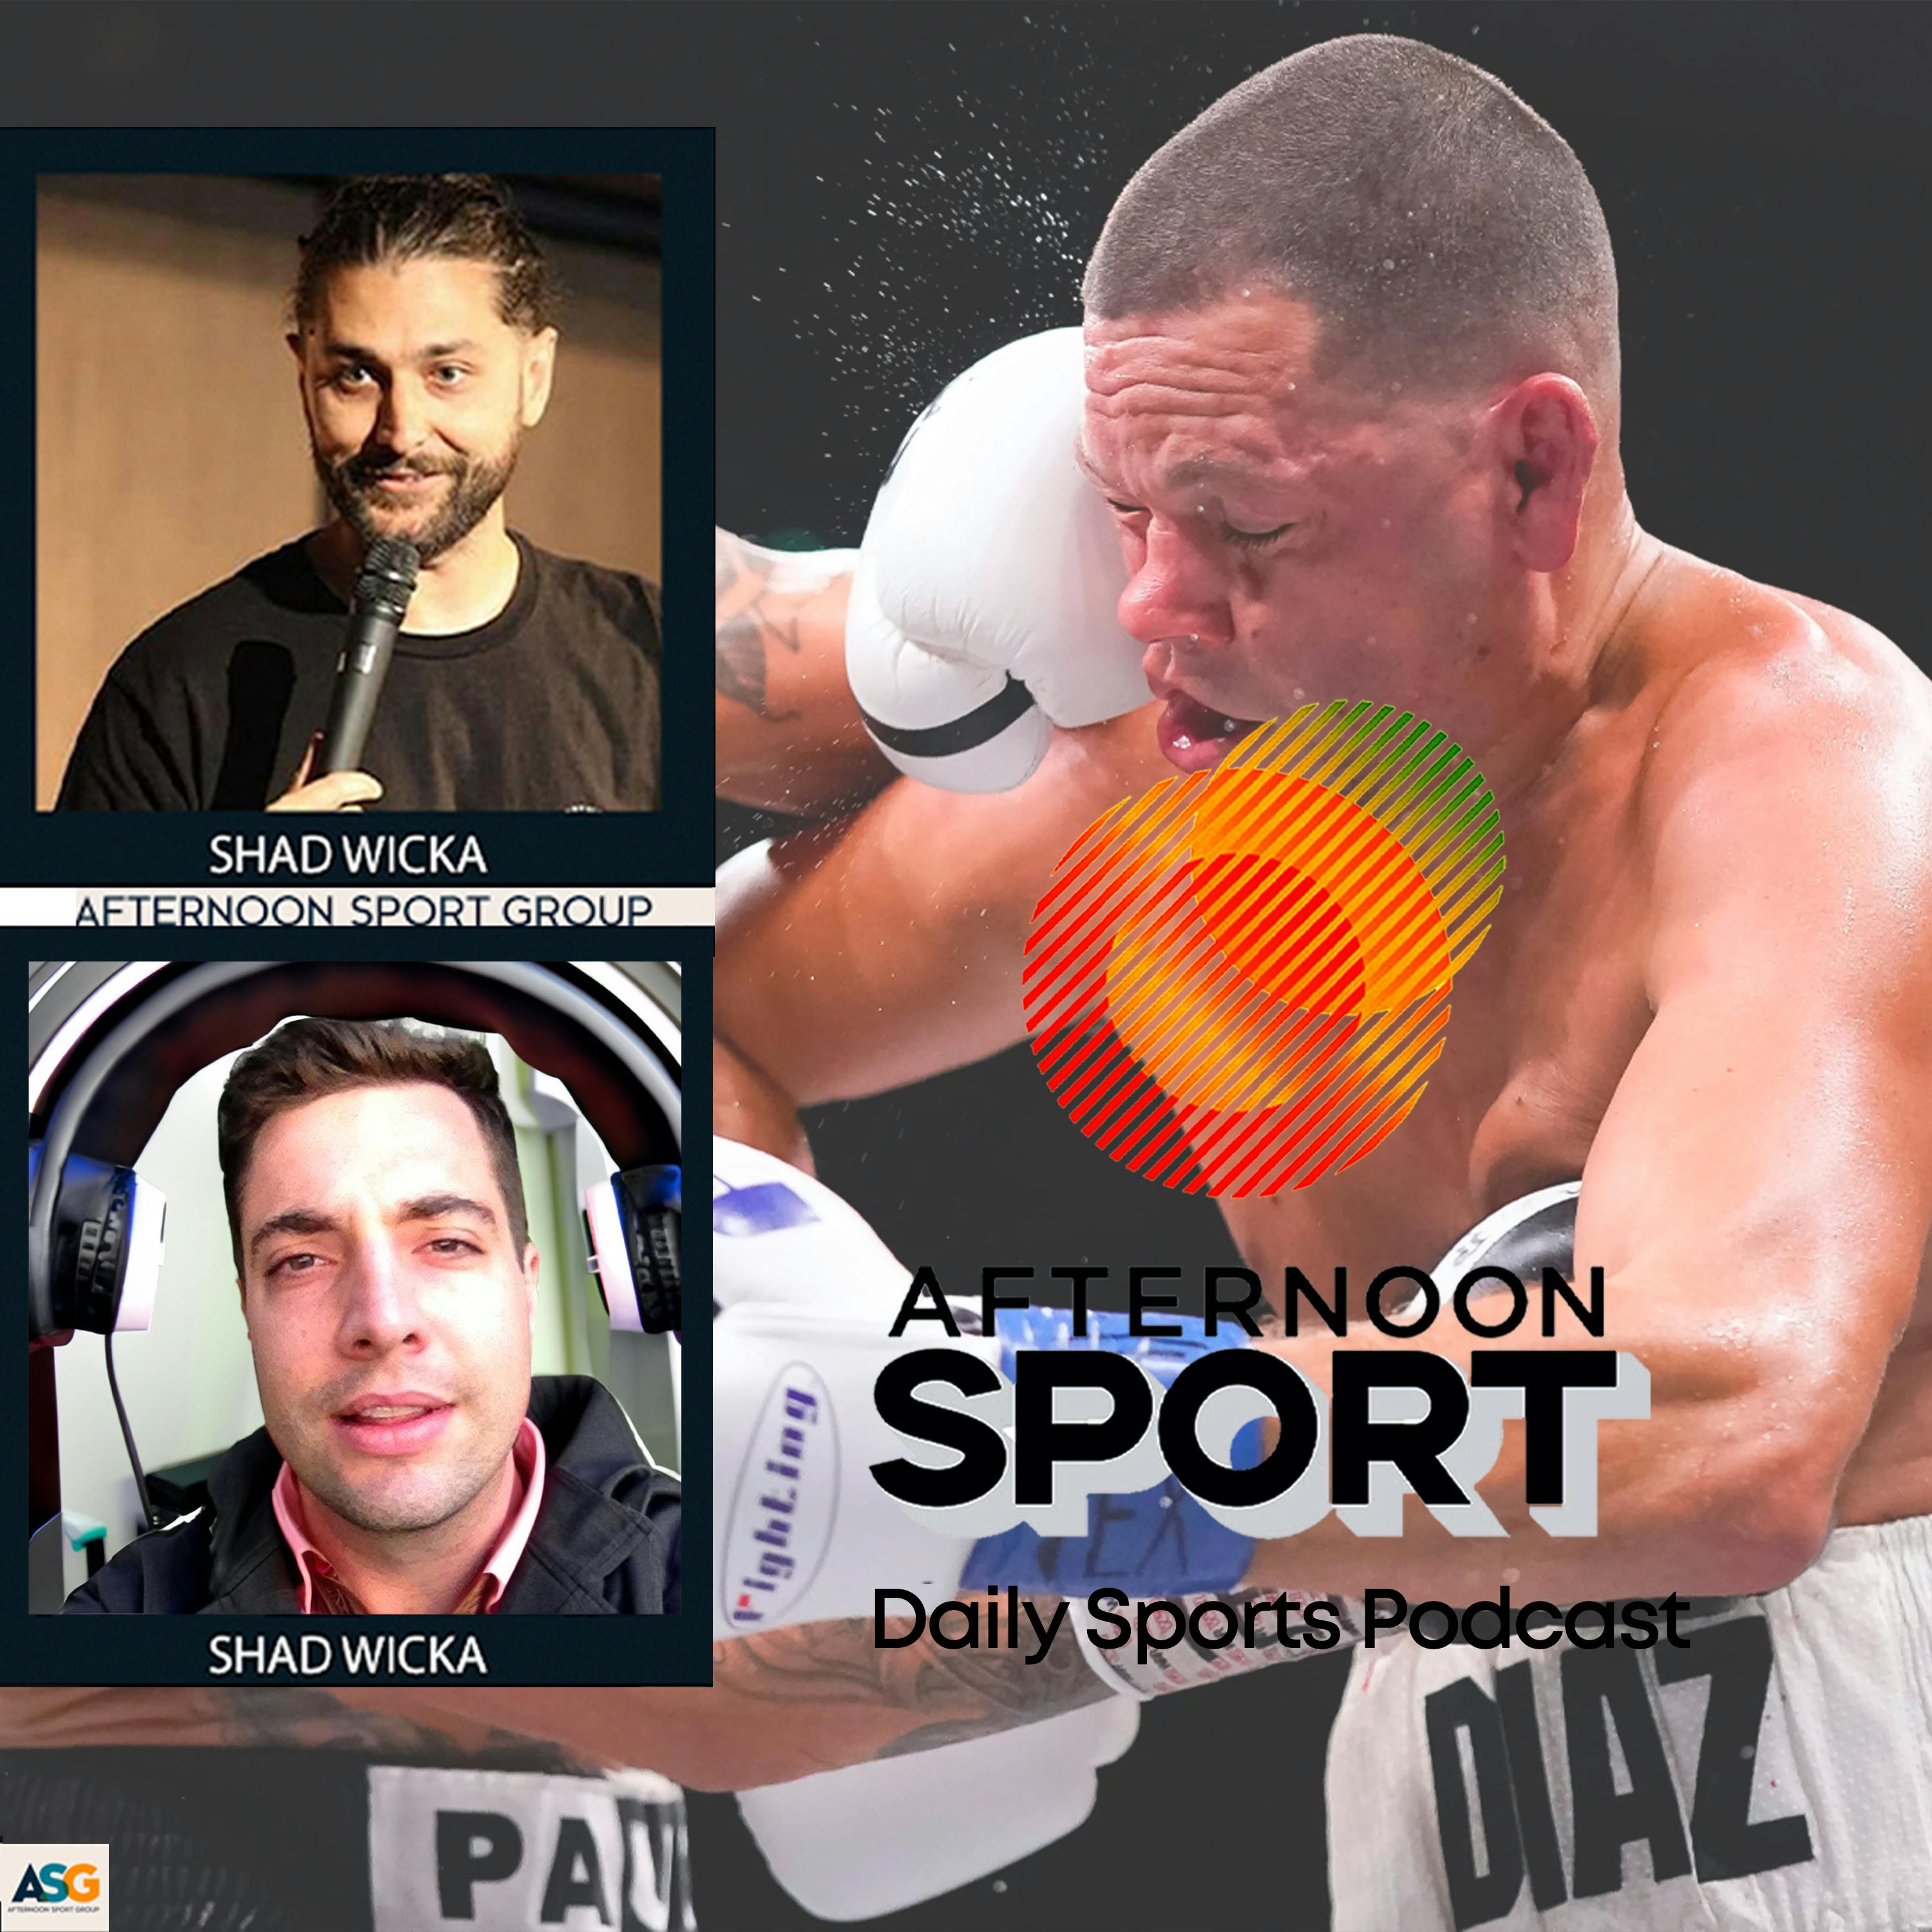 7th August Shad Wicka & Dan McHugh: $50k to fight Nat Diaz, Carlton win 7 in a row, Sweden and Japan looking good in Women's World Cup, Sharks won't make top 4 + more!